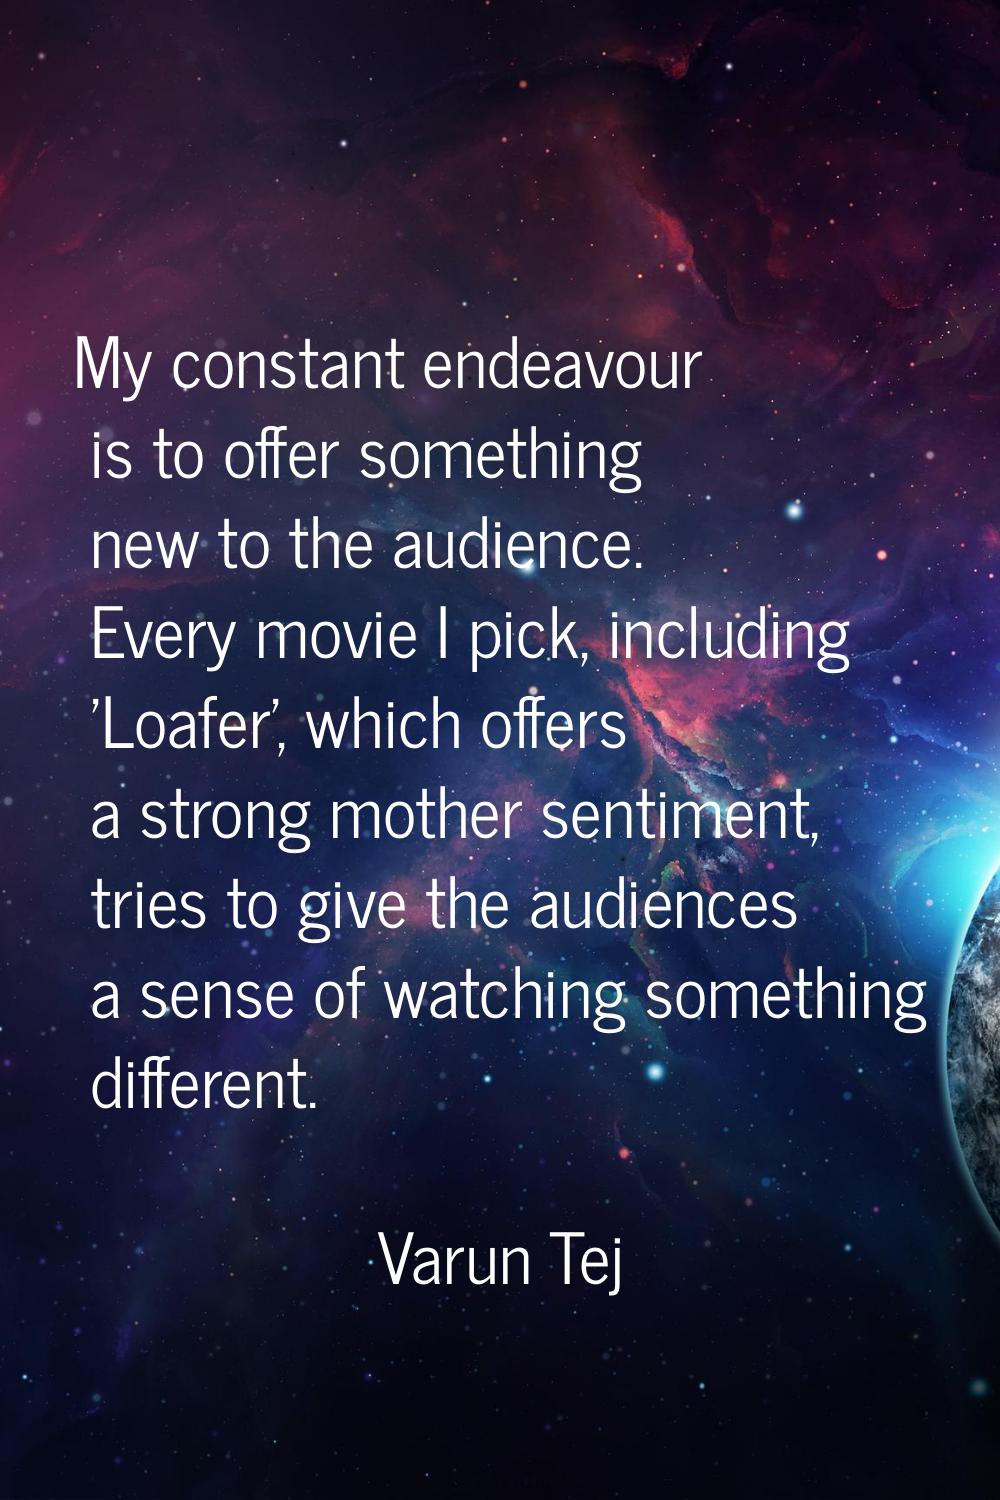 My constant endeavour is to offer something new to the audience. Every movie I pick, including 'Loa